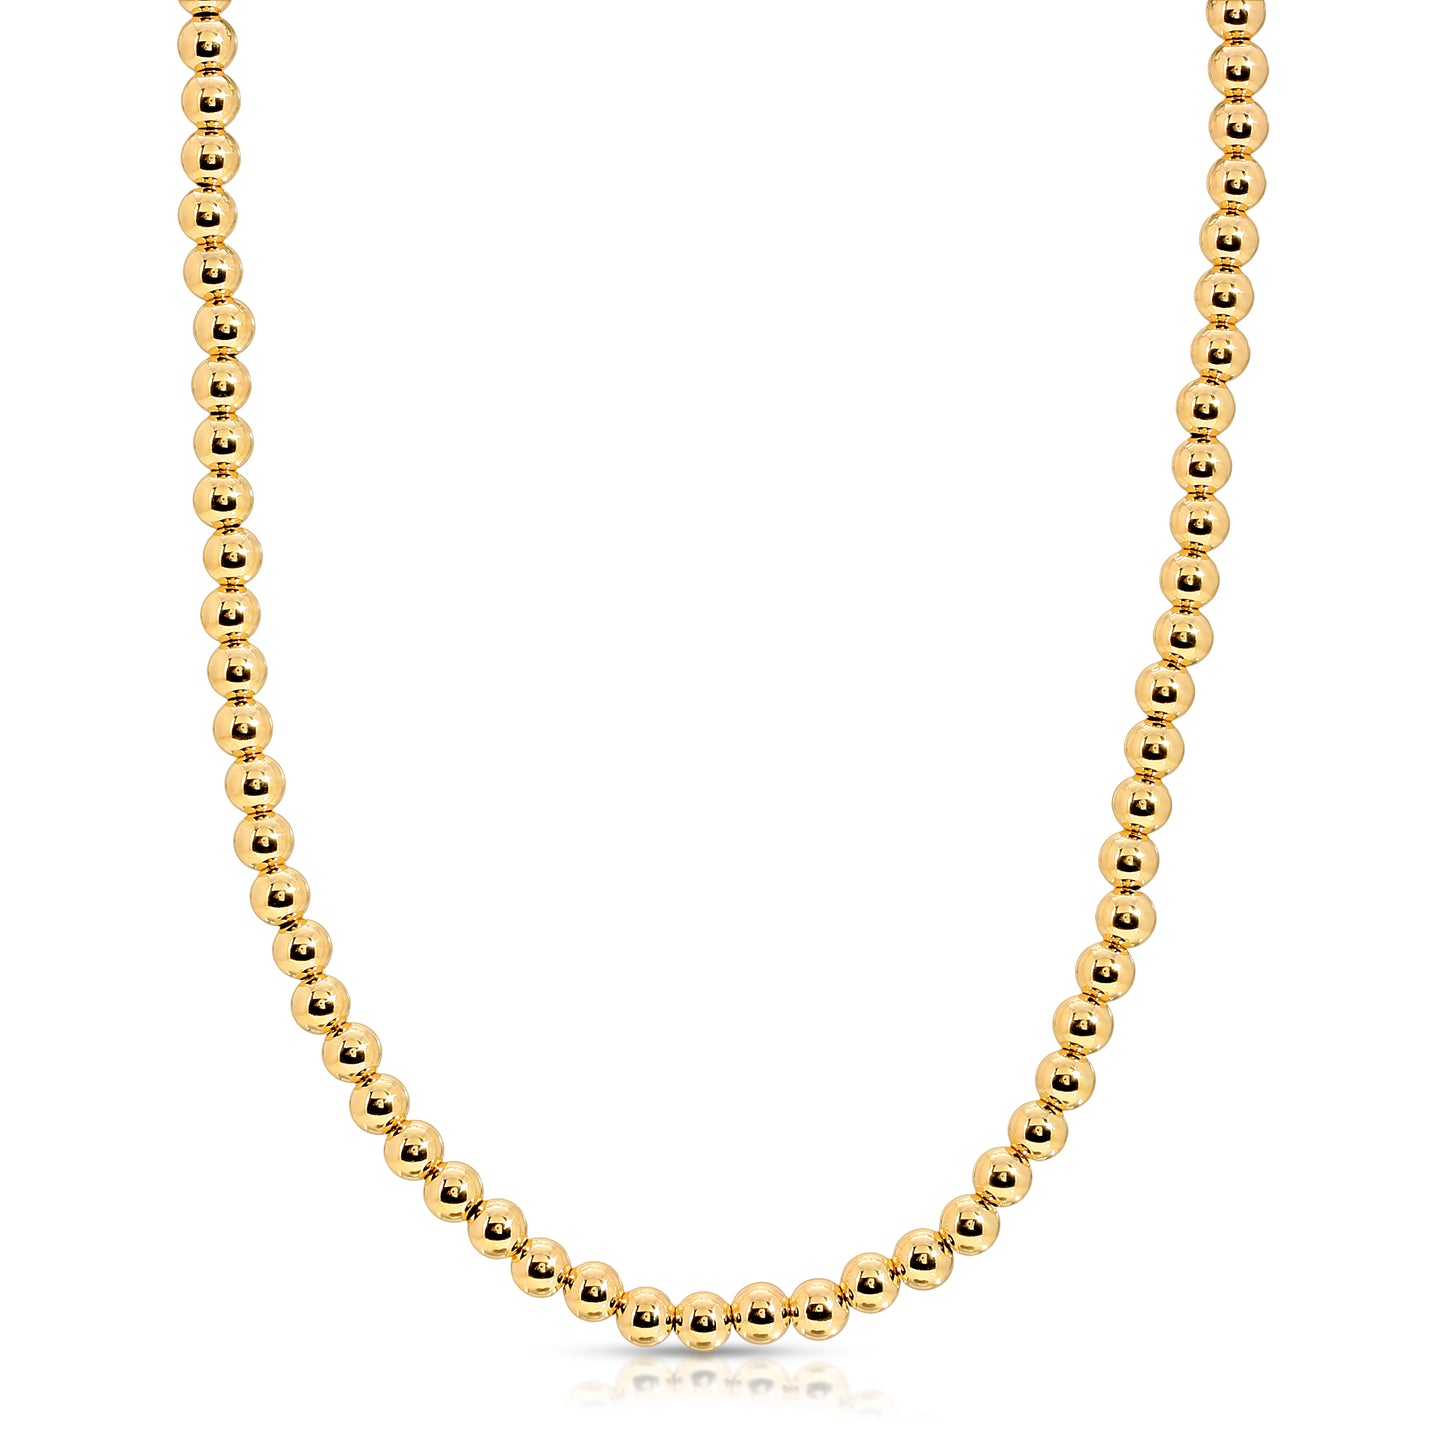 danielle-moosbrugger,GOLD BEAD NECKLACE,Necklaces